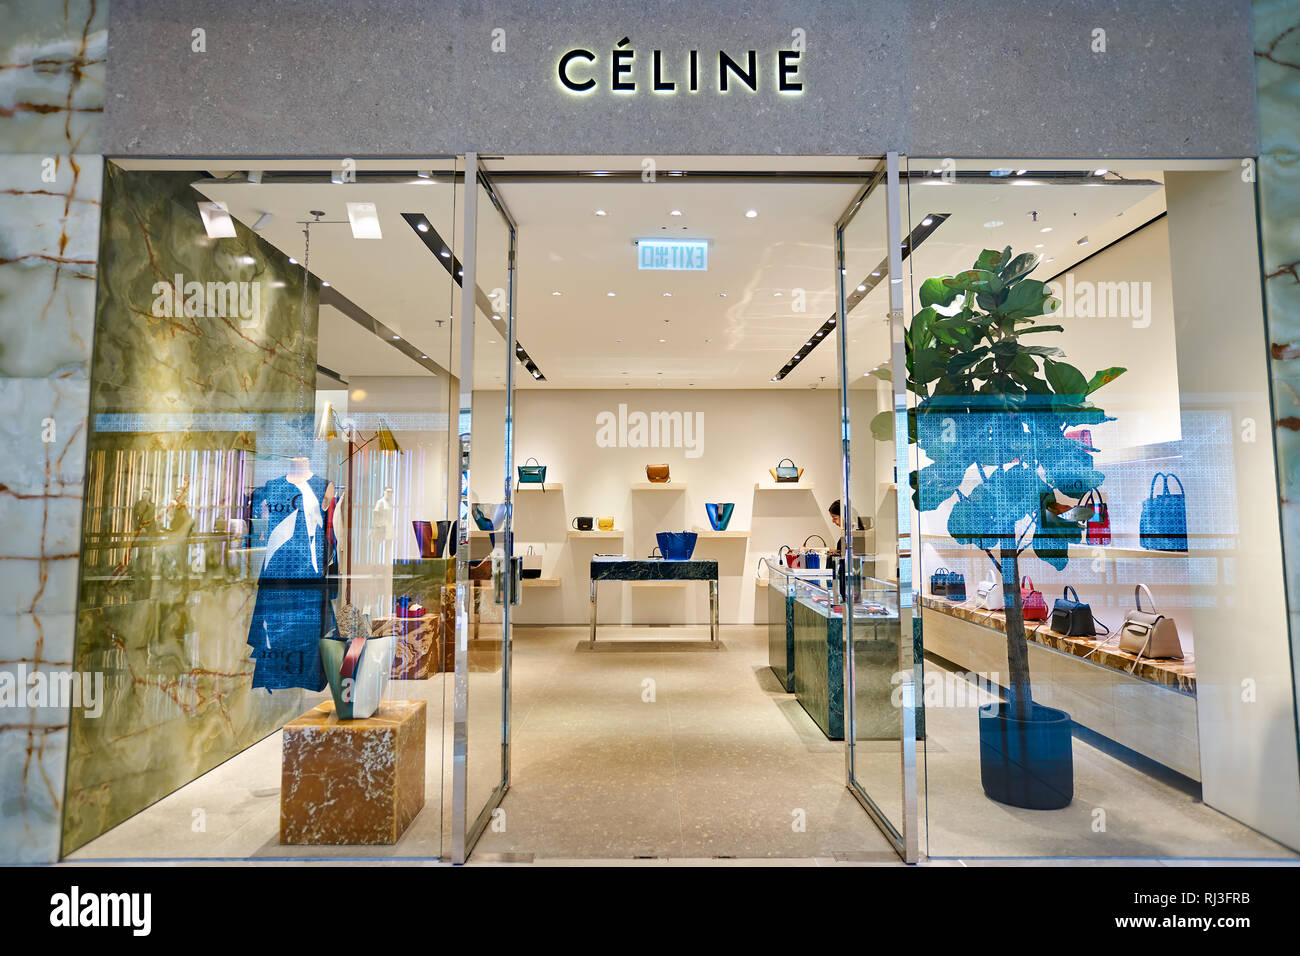 HONG KONG - JANUARY 26, 2016: Celine logo on the wall at Elements Shopping  Mall. Celine is a French ready-to-wear and leather luxury goods brand Stock  Photo - Alamy